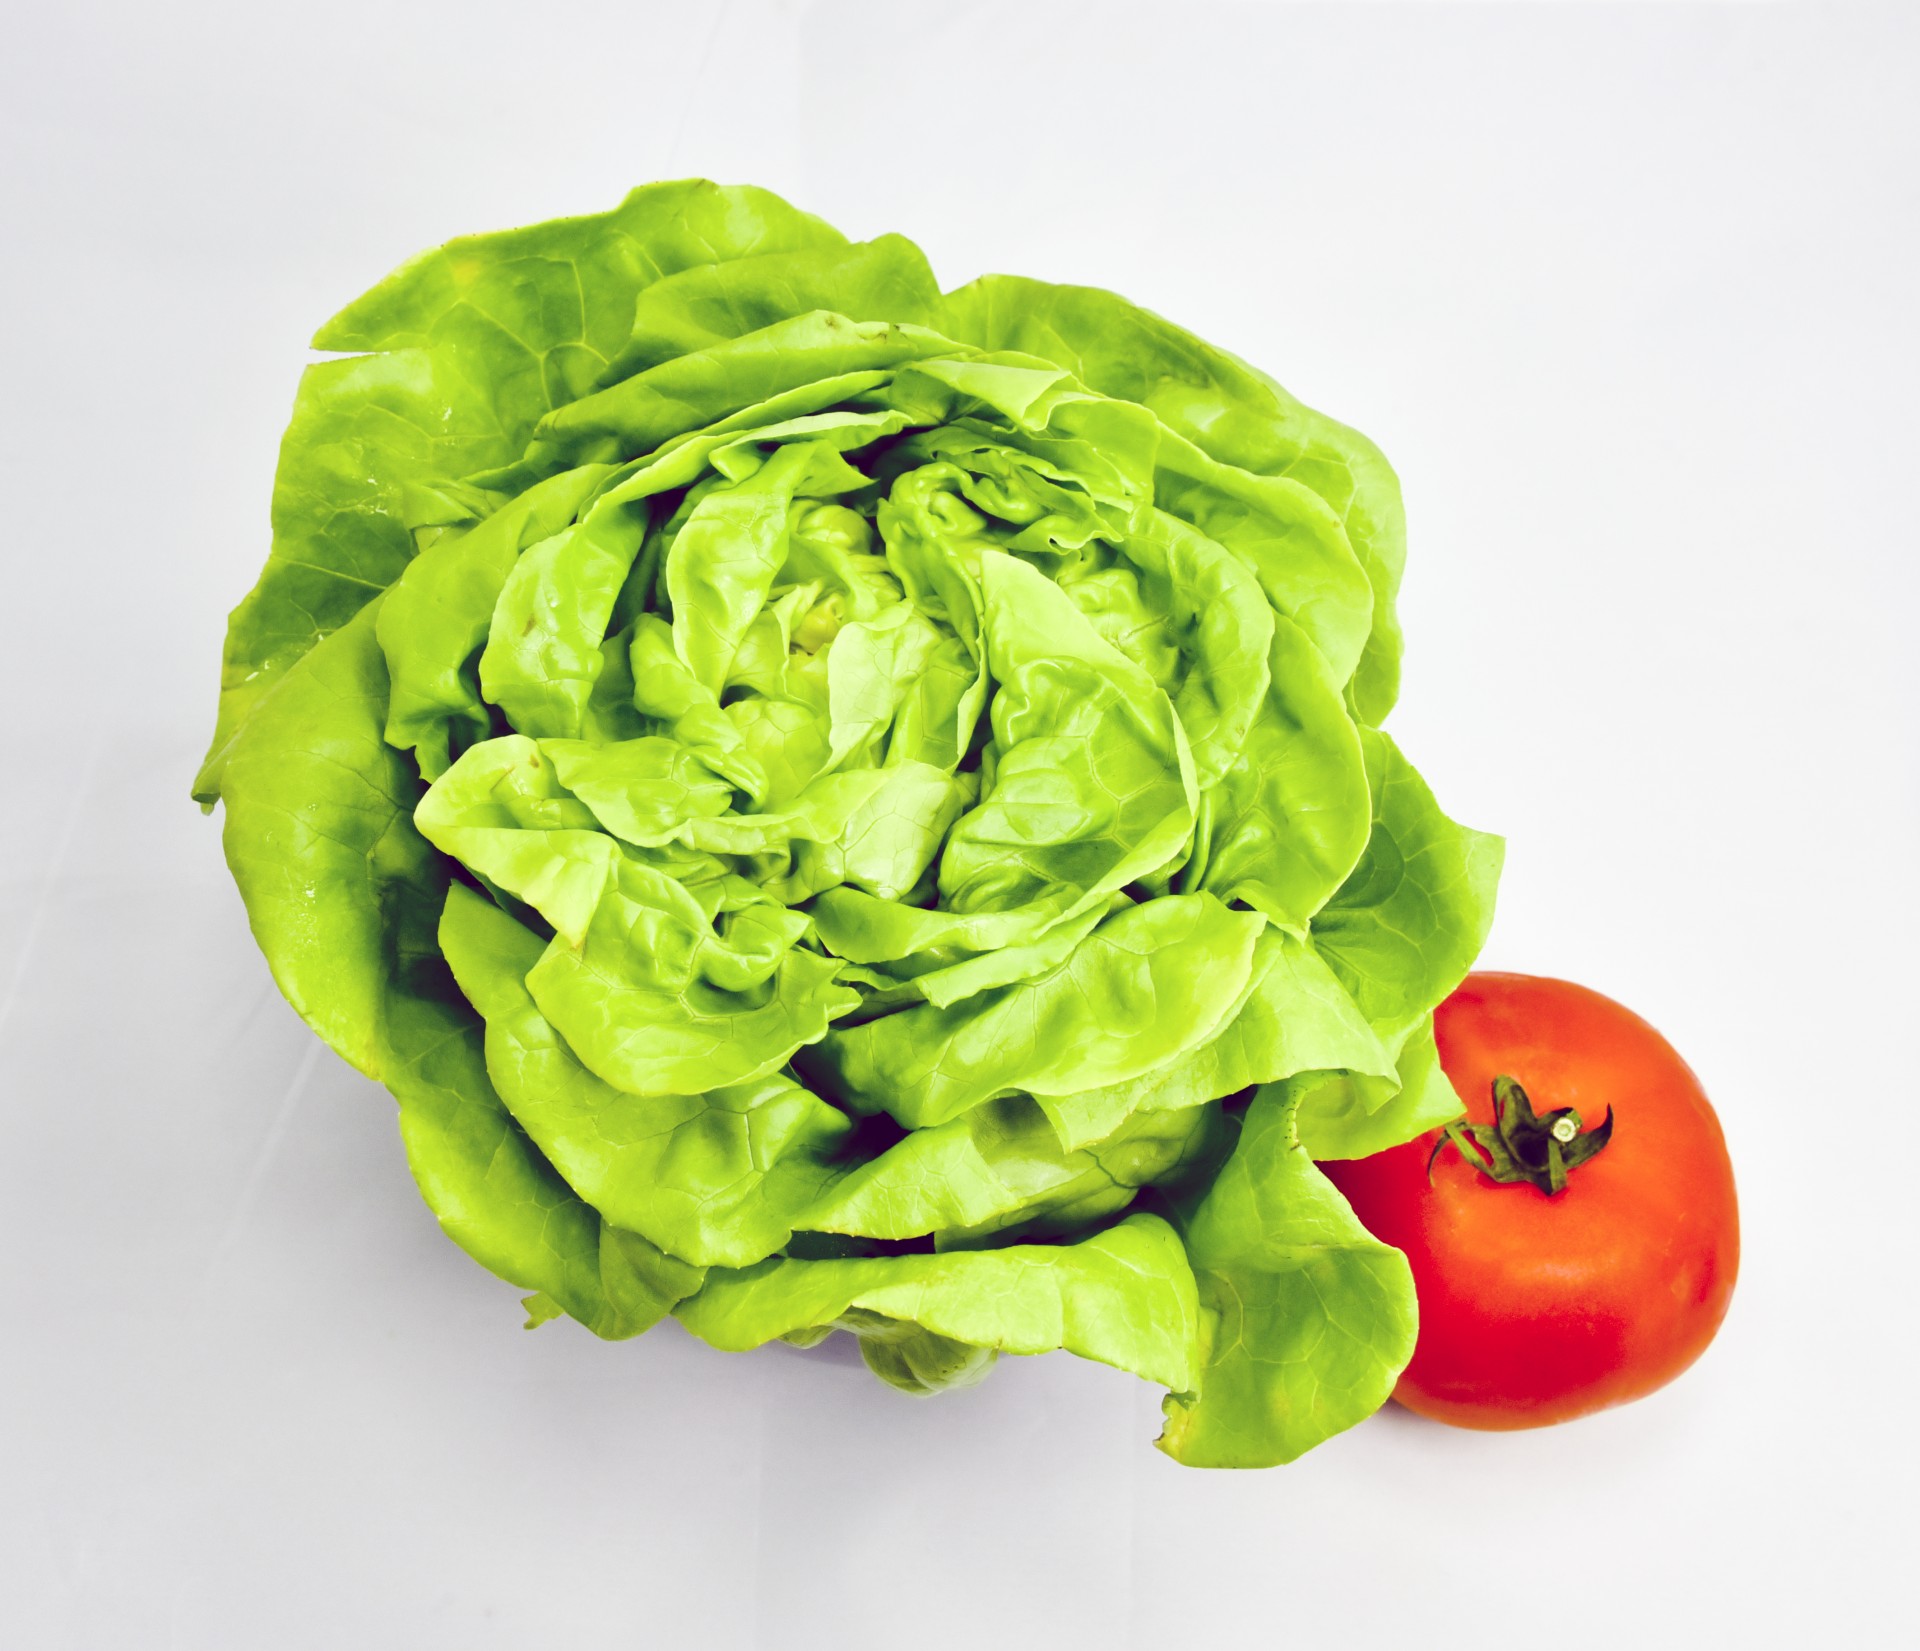 Still Life shot of a head of lettuce and a whole red tomato.